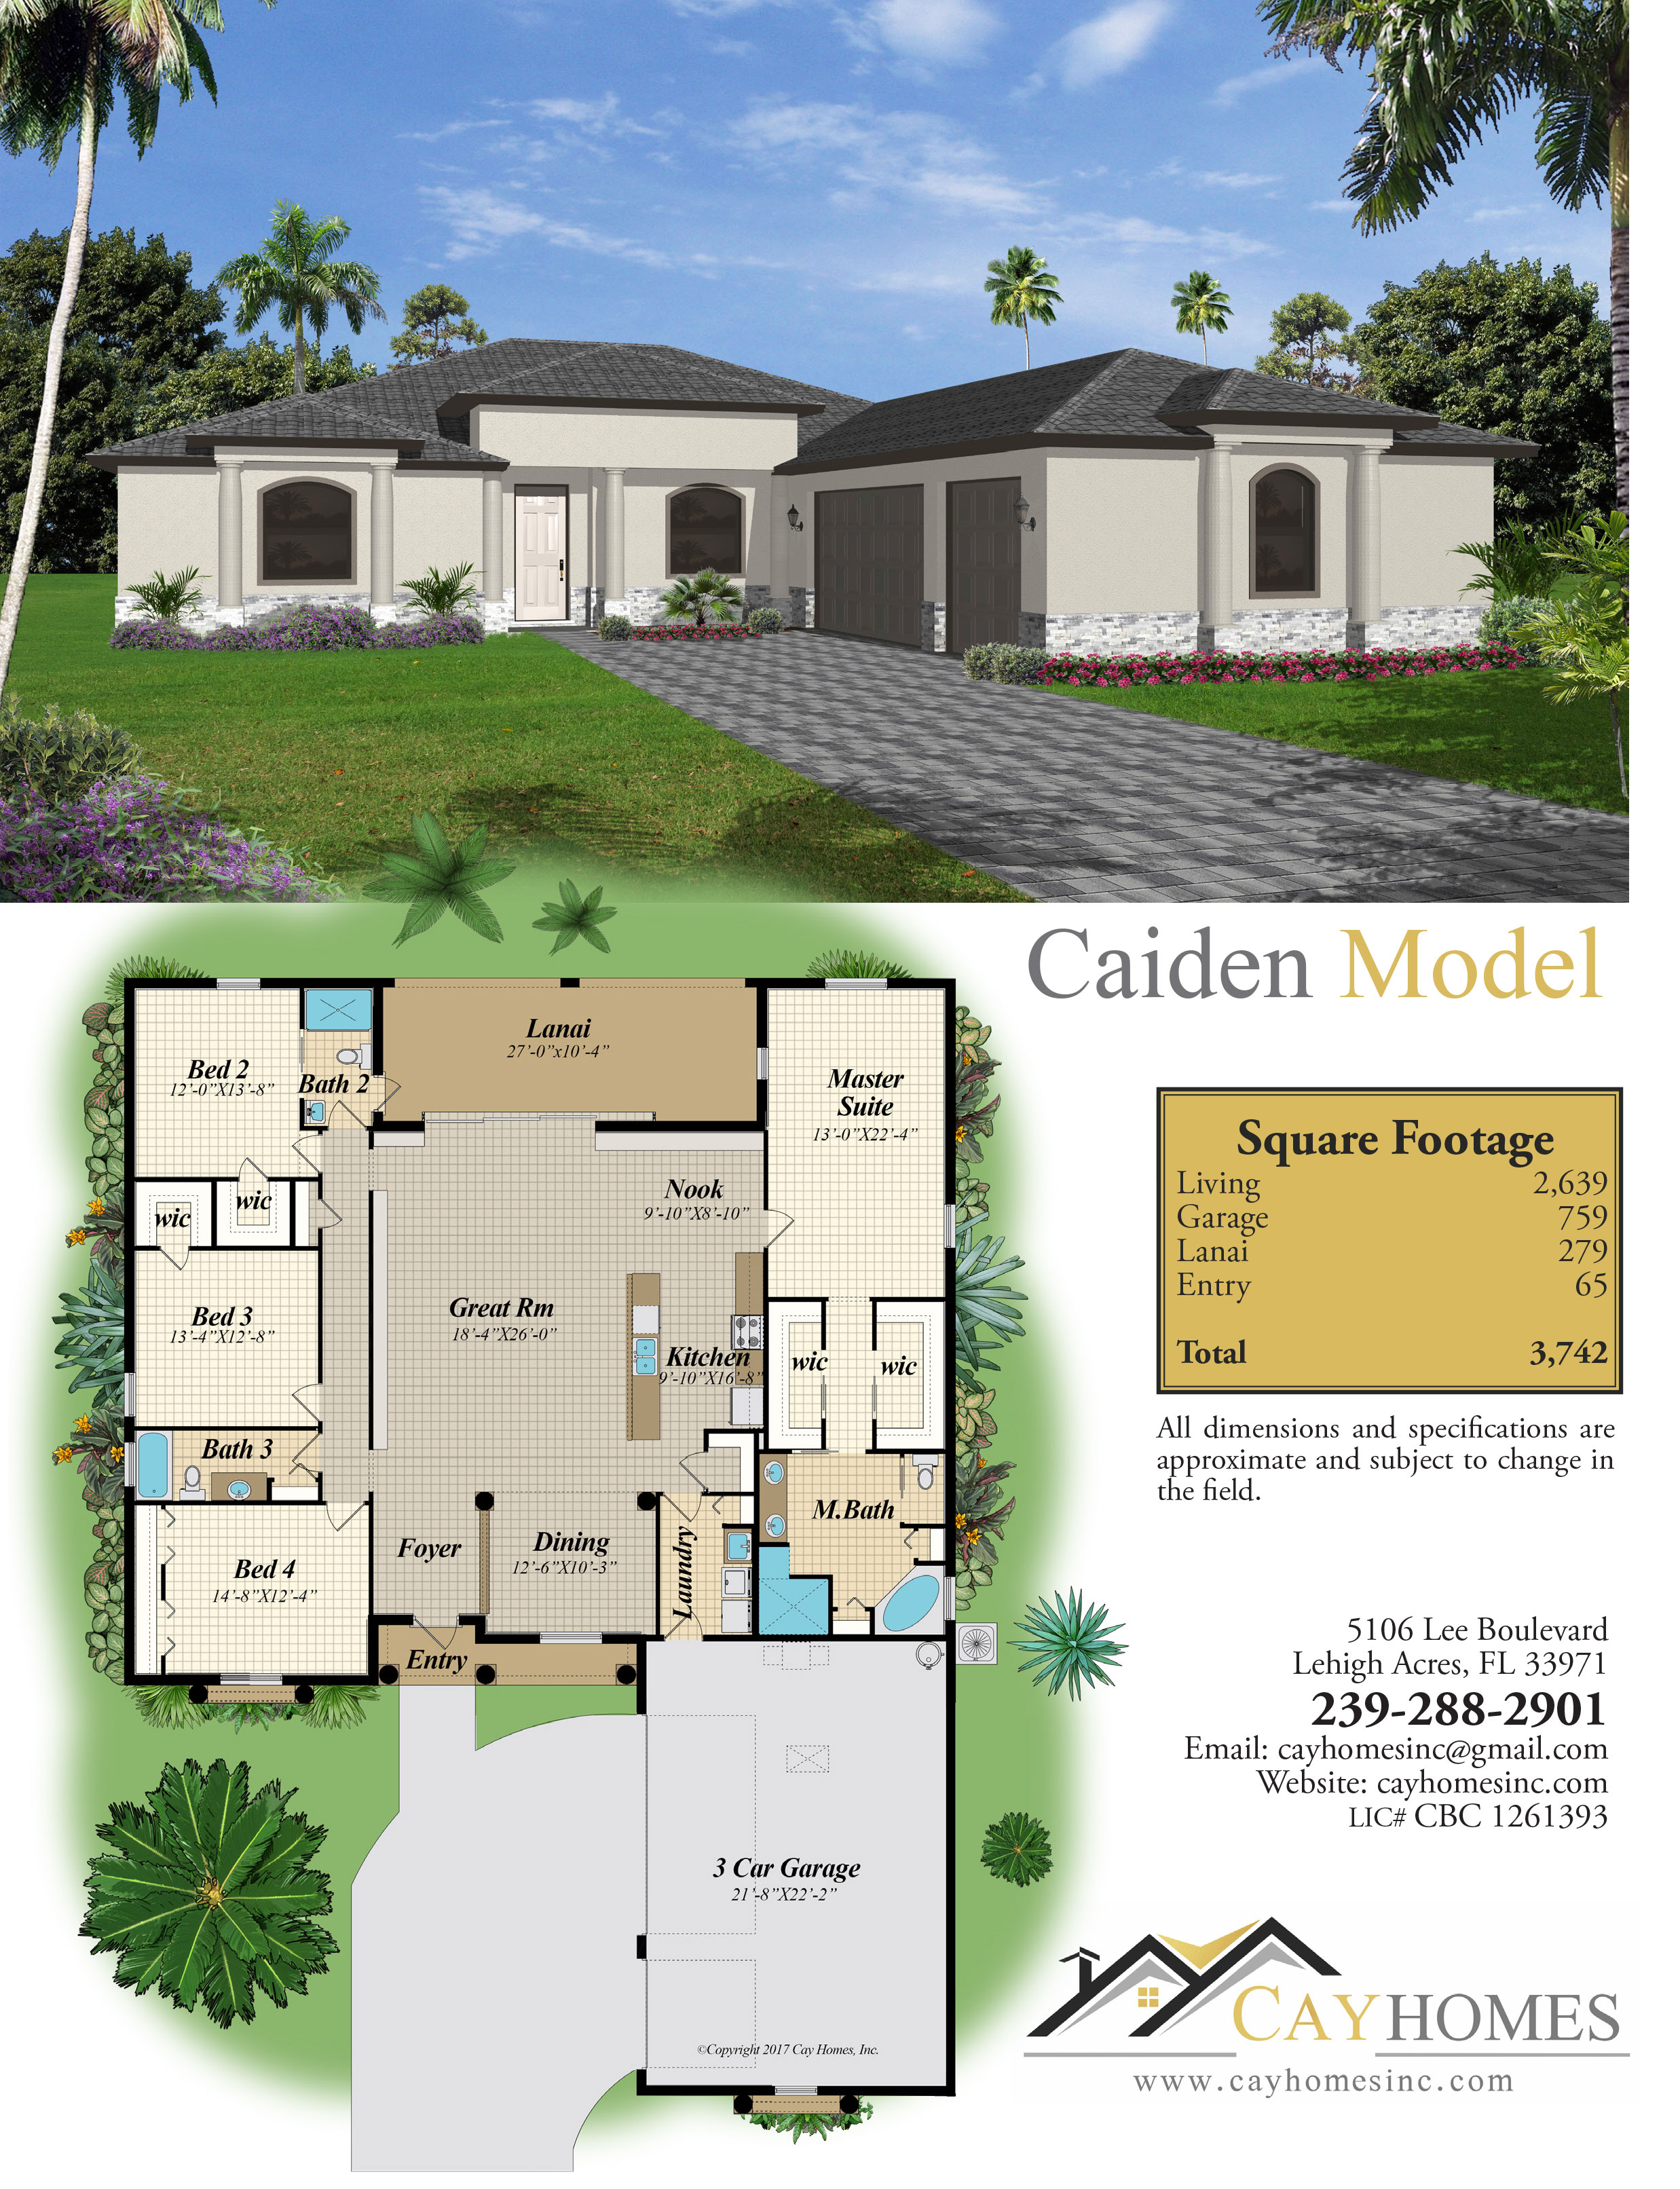 The Caiden Home Brochure, a Model Home by Cay Homes, Inc.